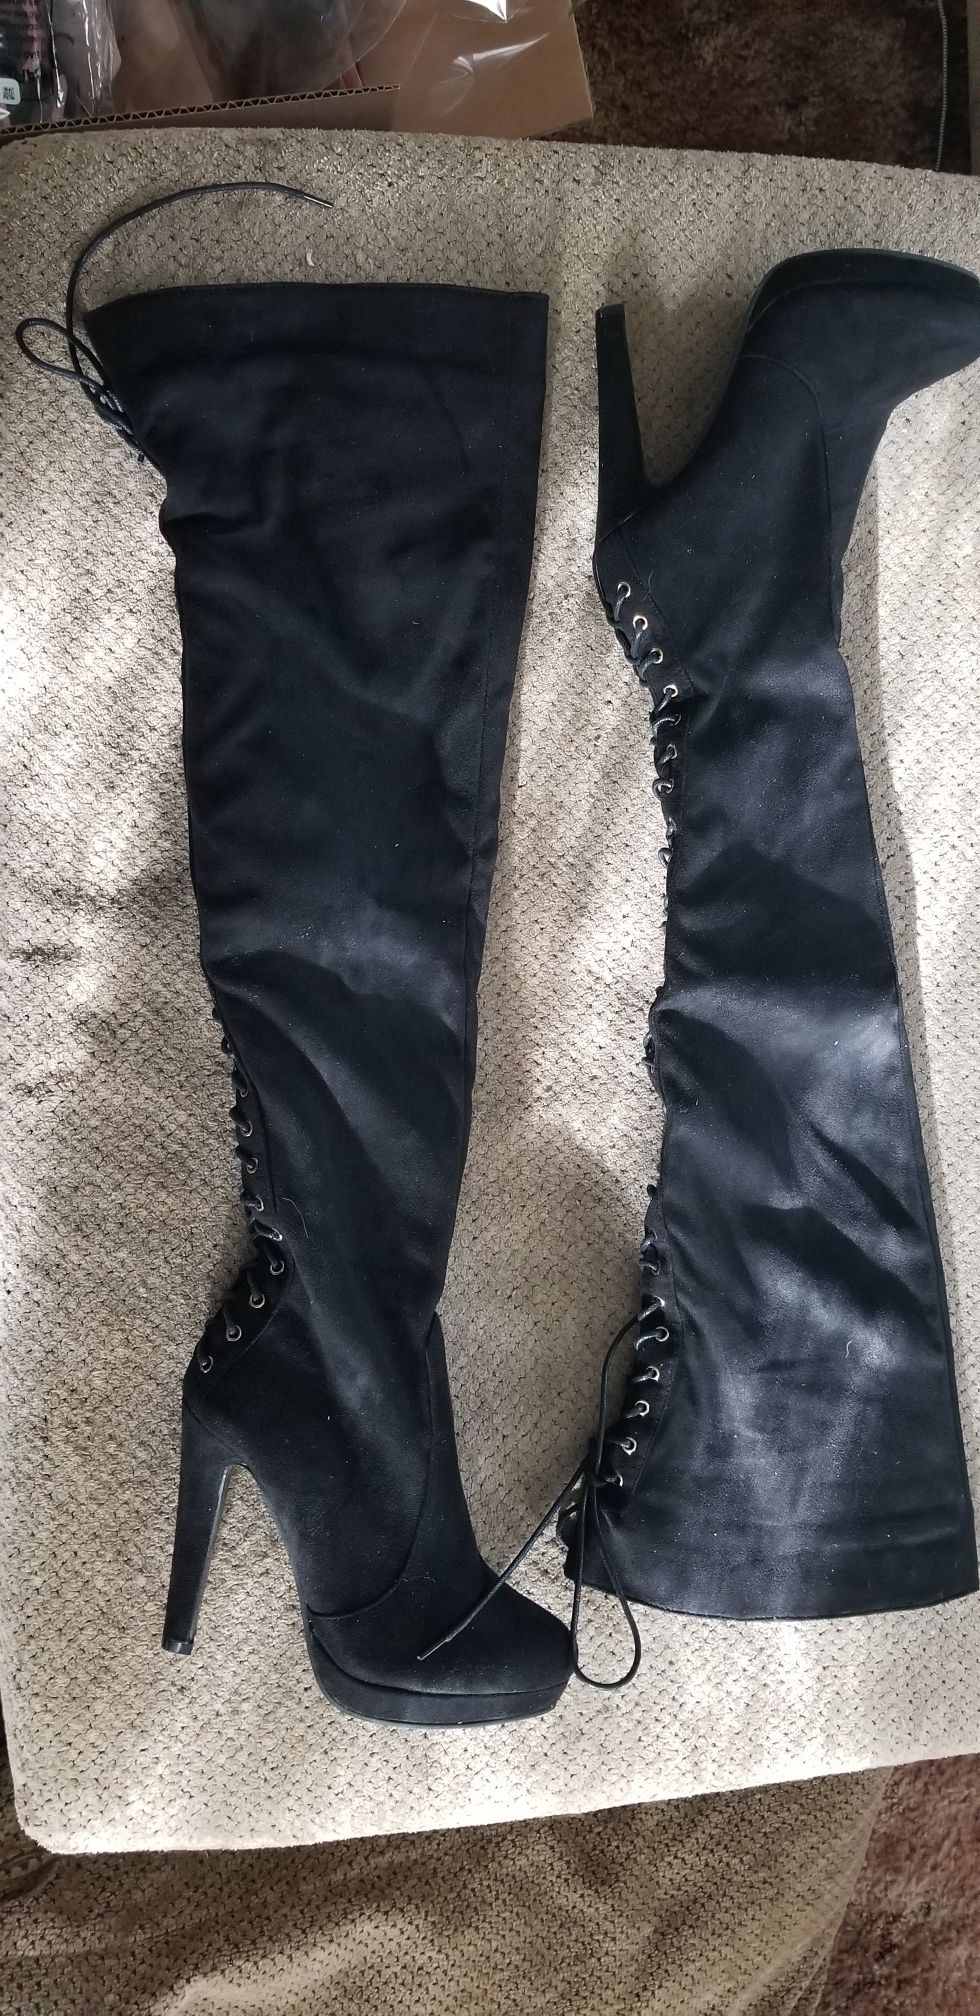 Size 7 1/2 Thigh high boots